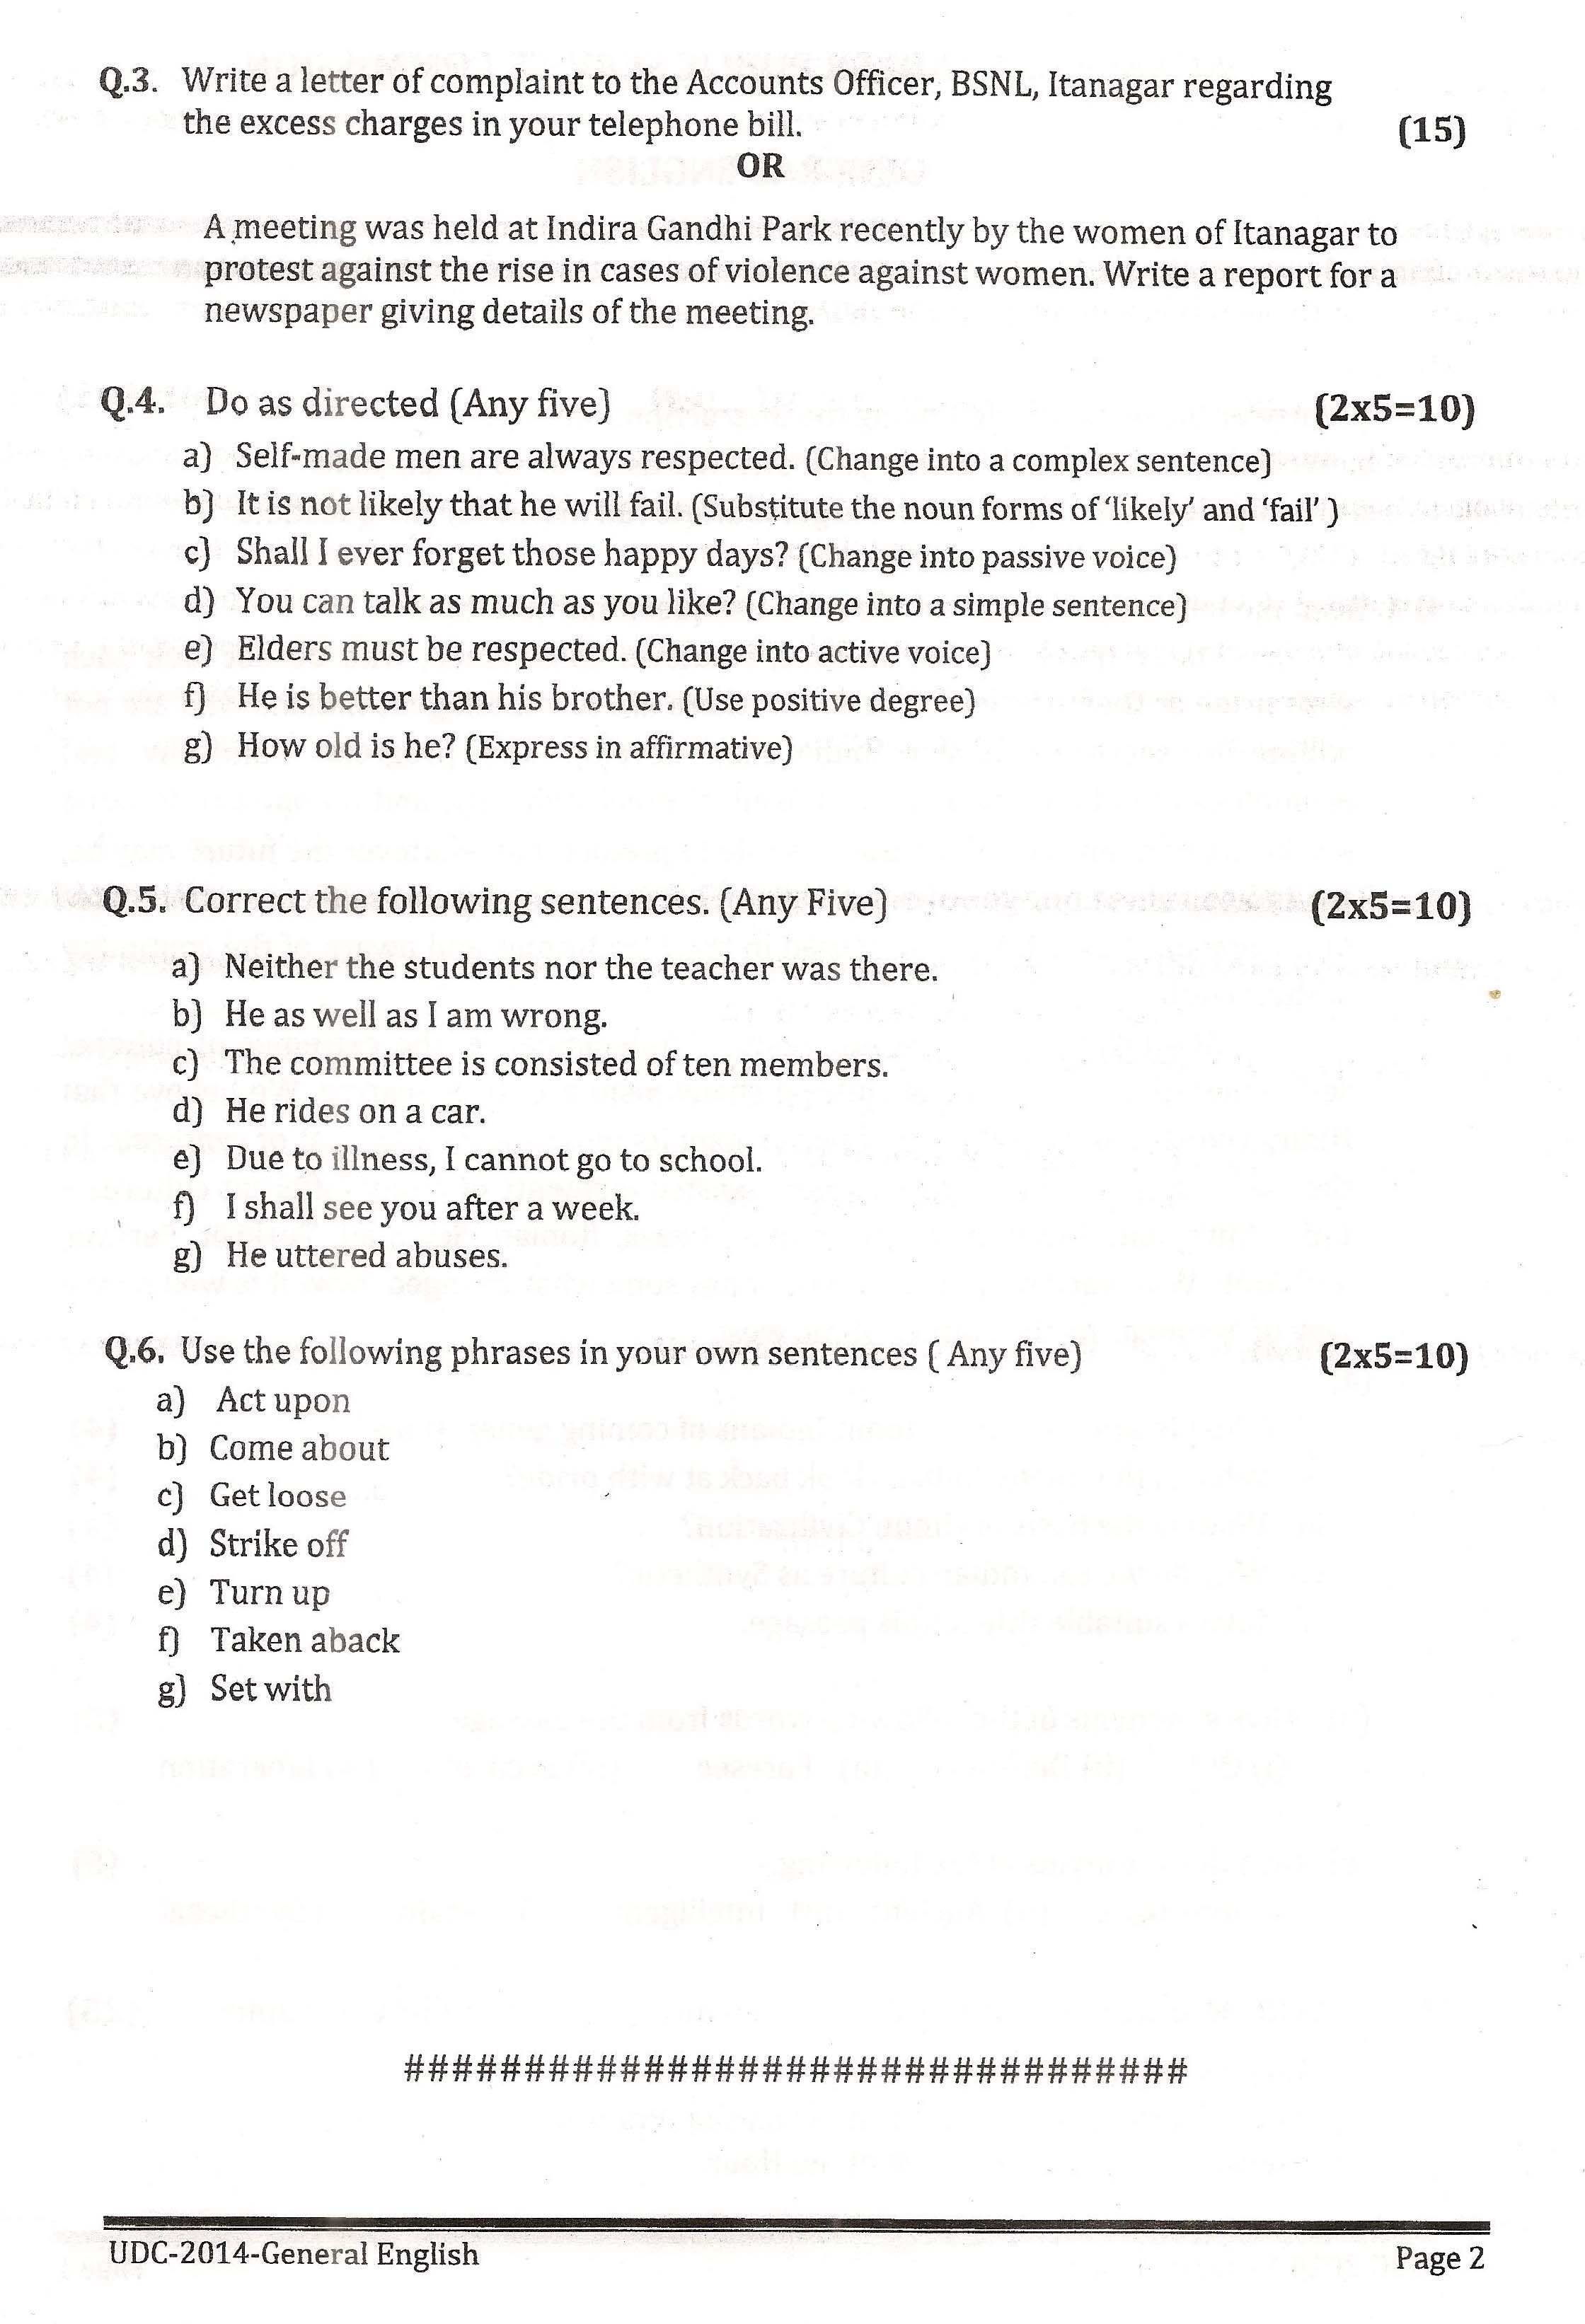 APPSC Upper Division Clerk English Exam Question Paper 2014 2